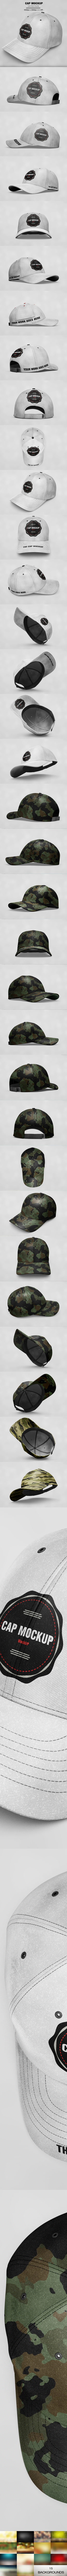 Download Cap Mockup On Behance Yellowimages Mockups